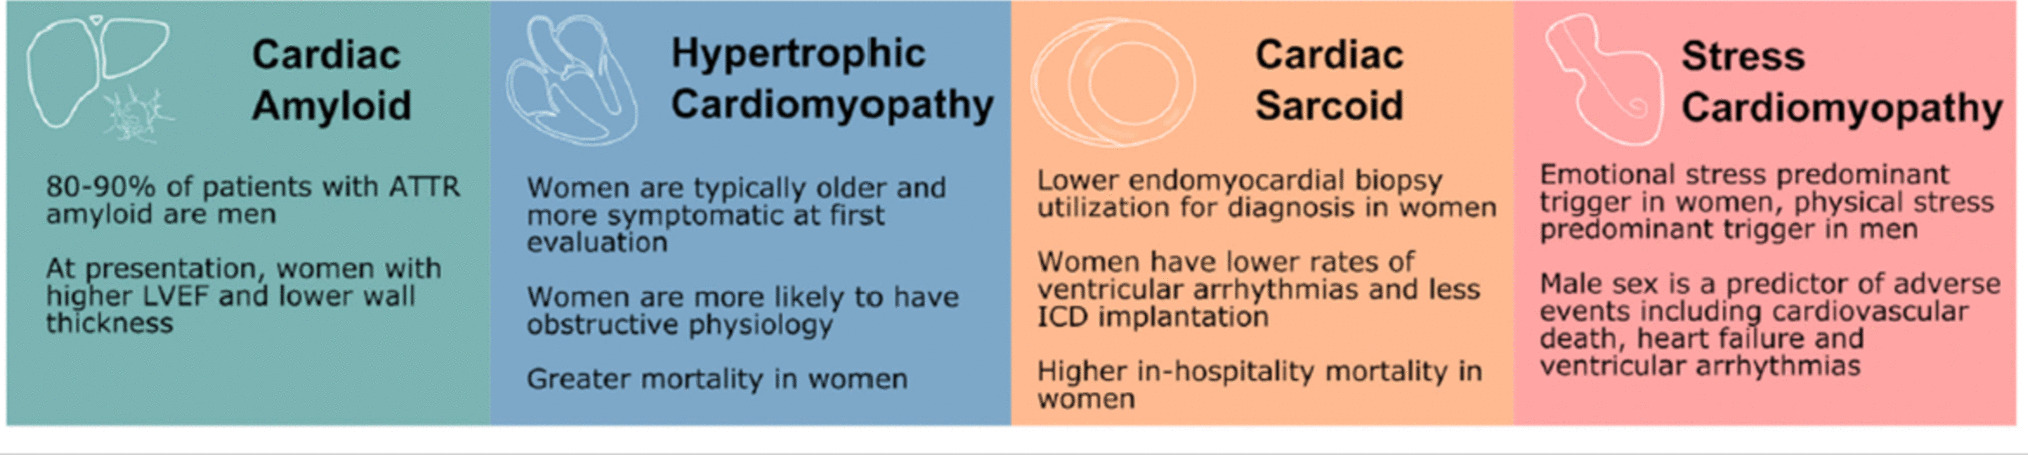 Disease features and management of cardiomyopathies in women